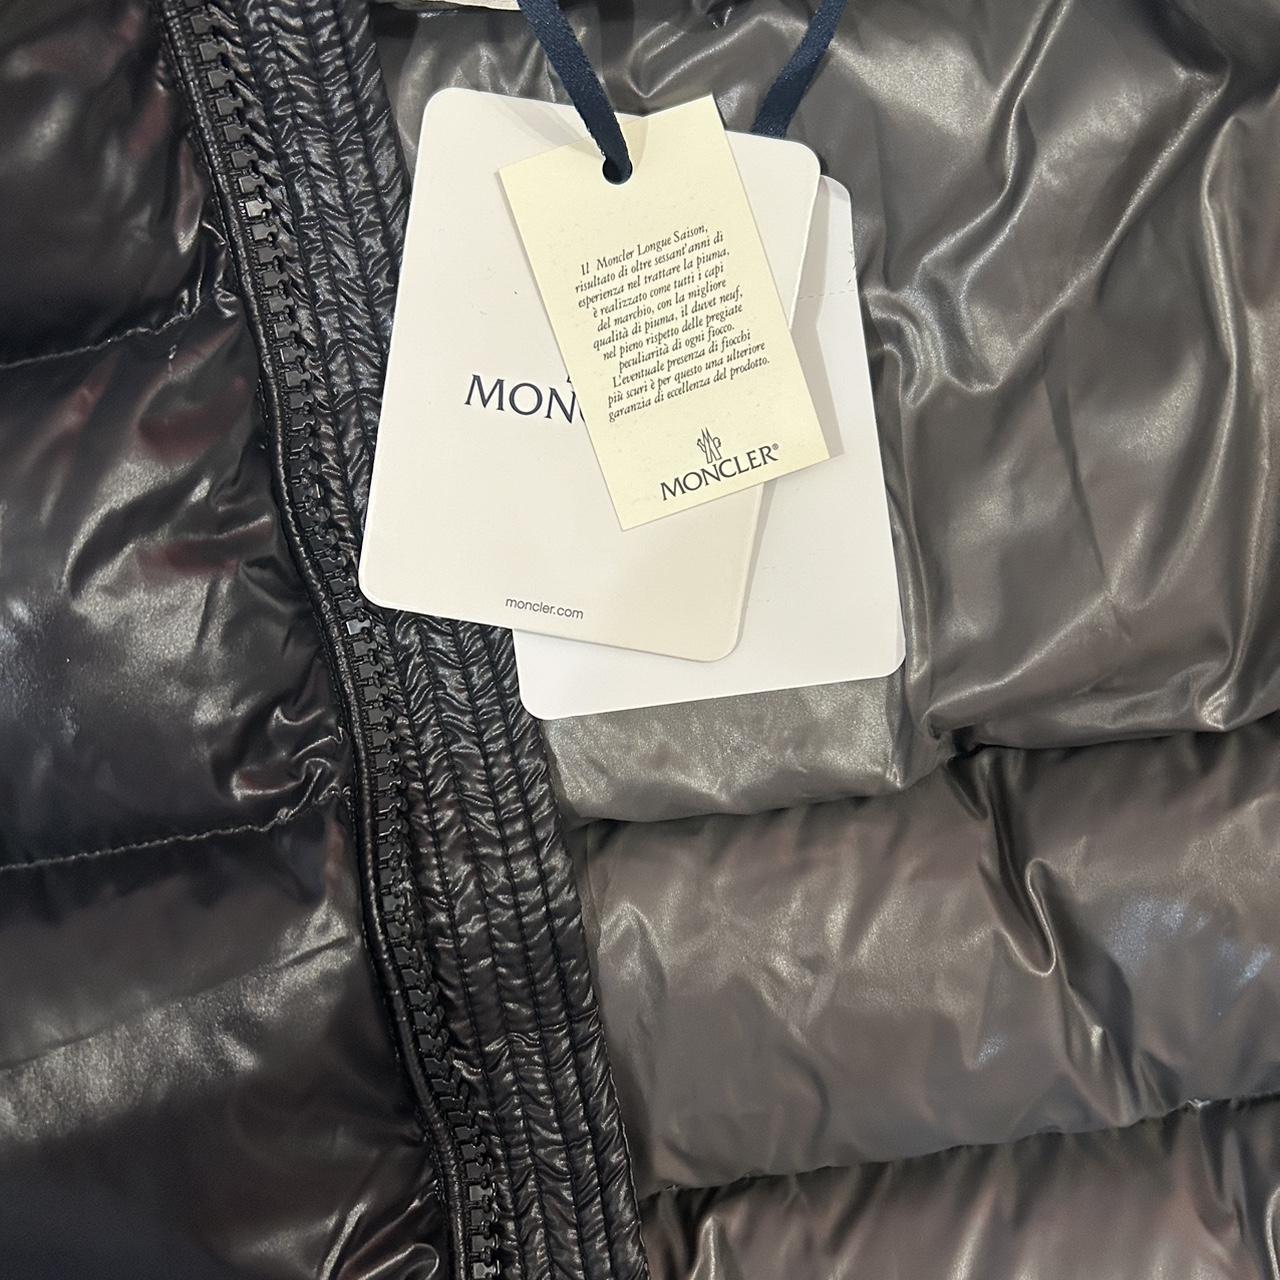 MONCLER MAYA •Authentic & scannable with receipt +... - Depop